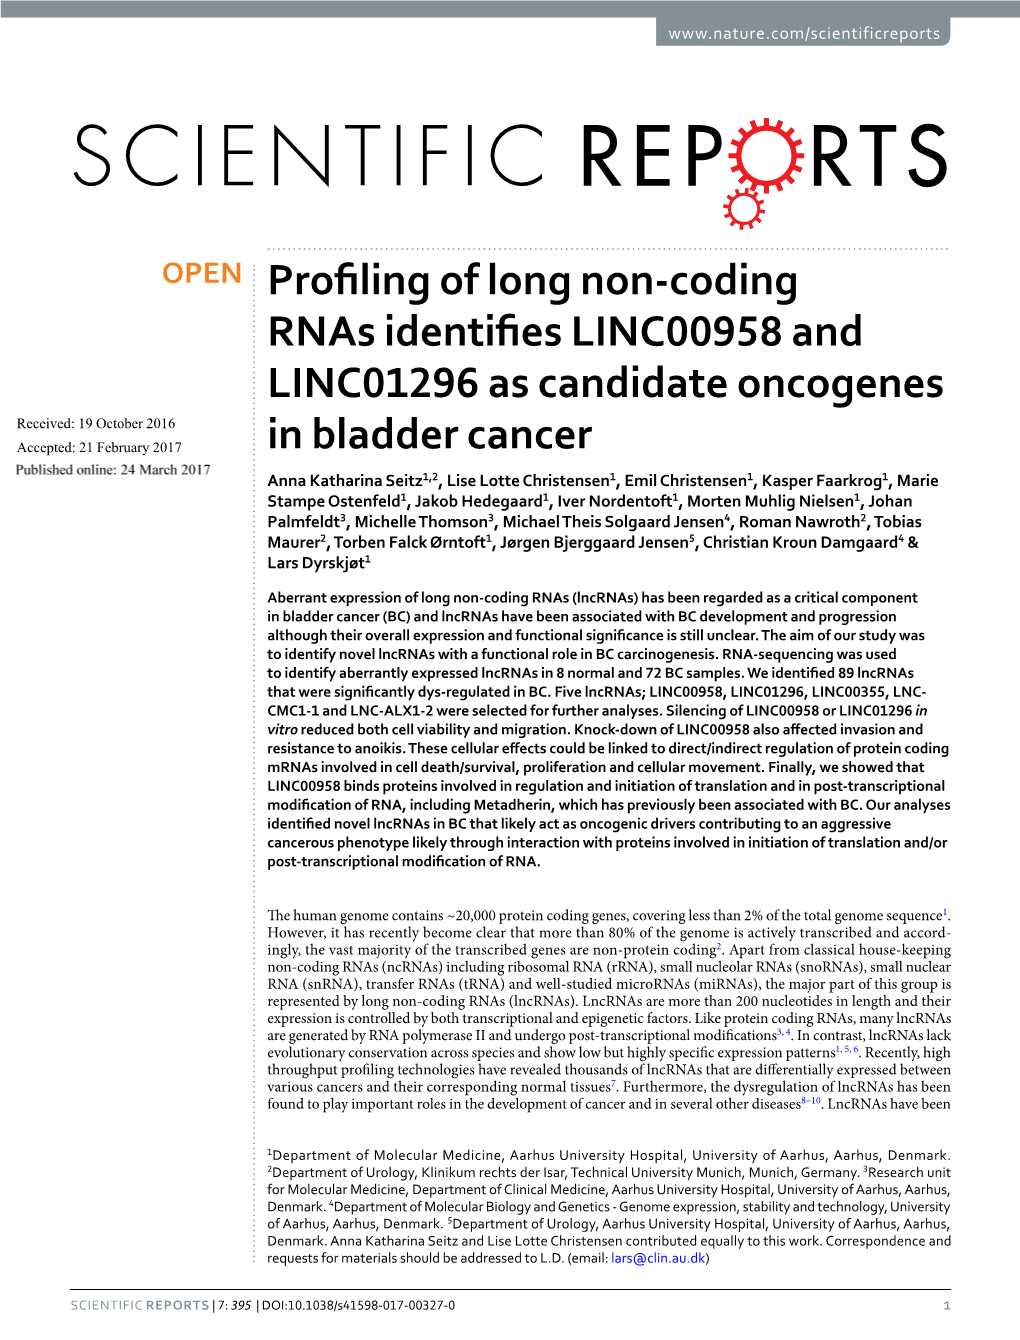 Profiling of Long Non-Coding Rnas Identifies LINC00958 and LINC01296 As Candidate Oncogenes in Bladder Cancer